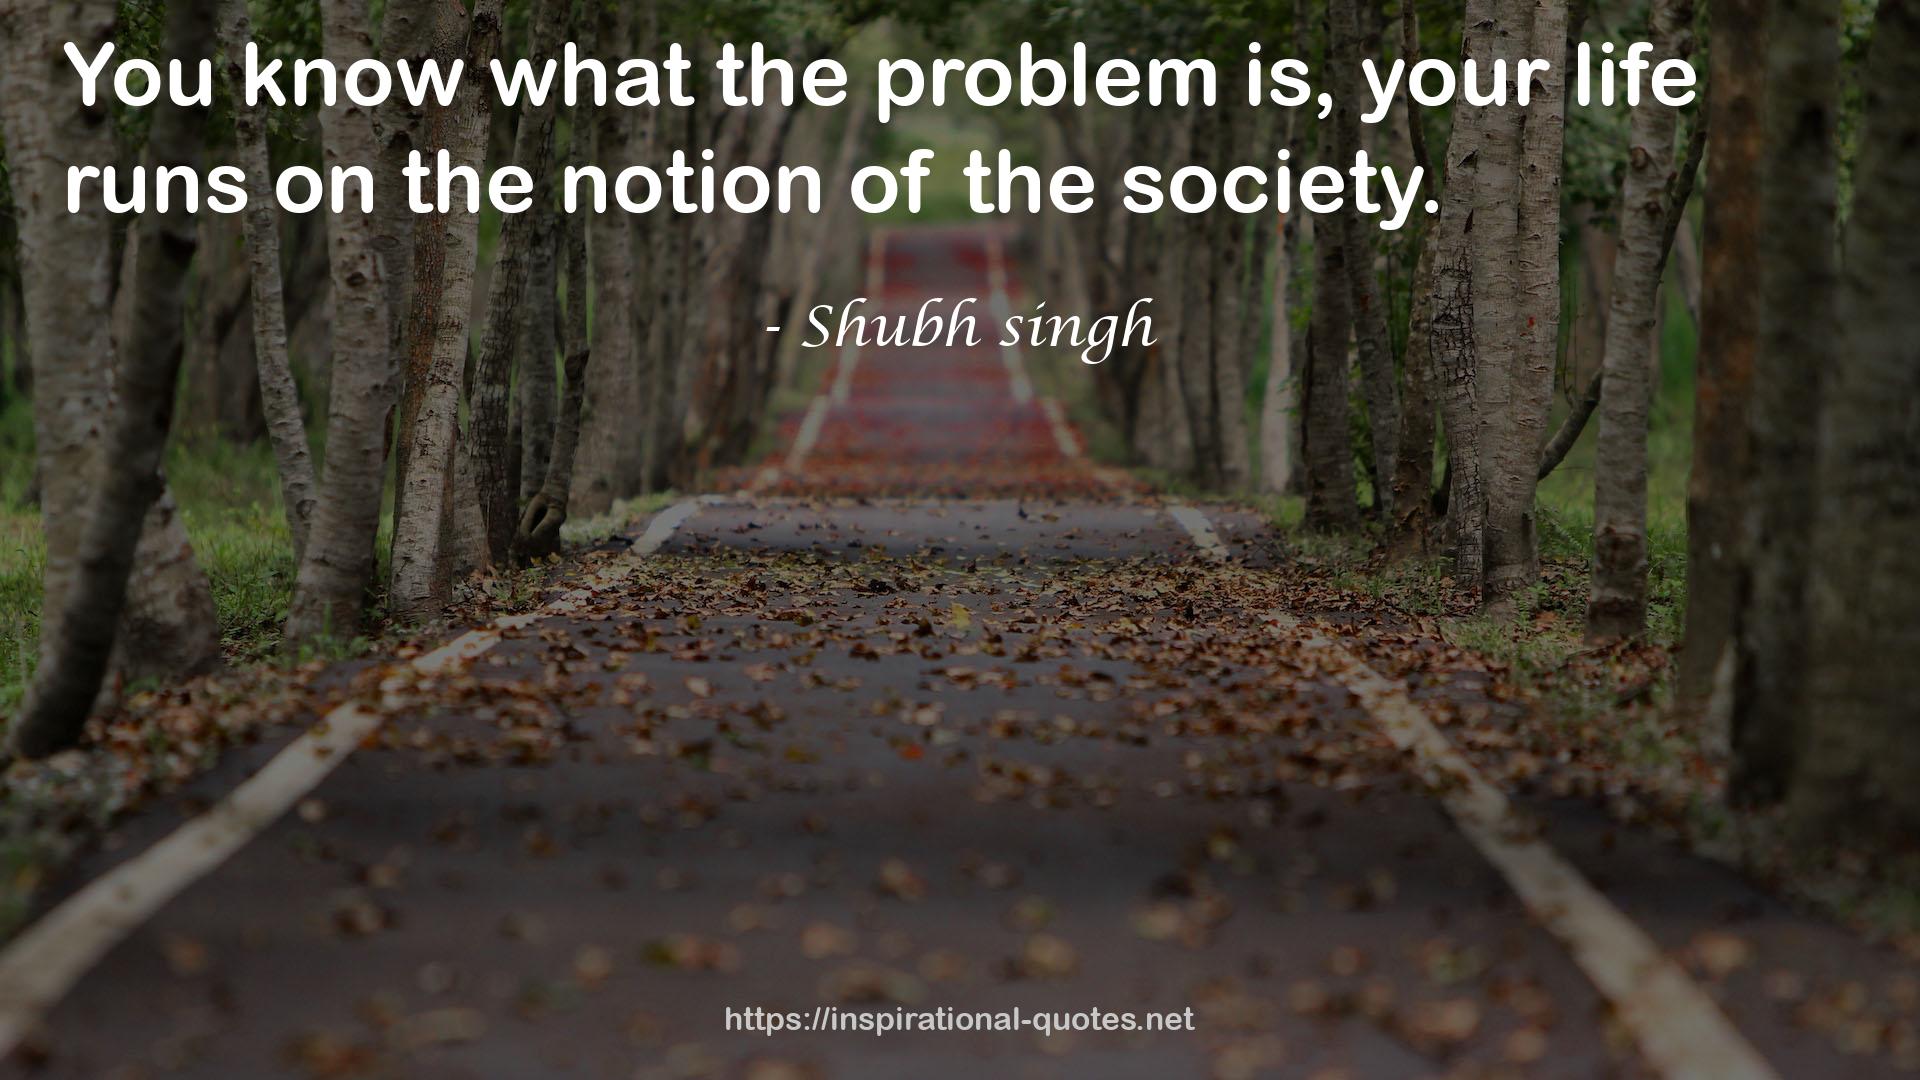 Shubh singh QUOTES